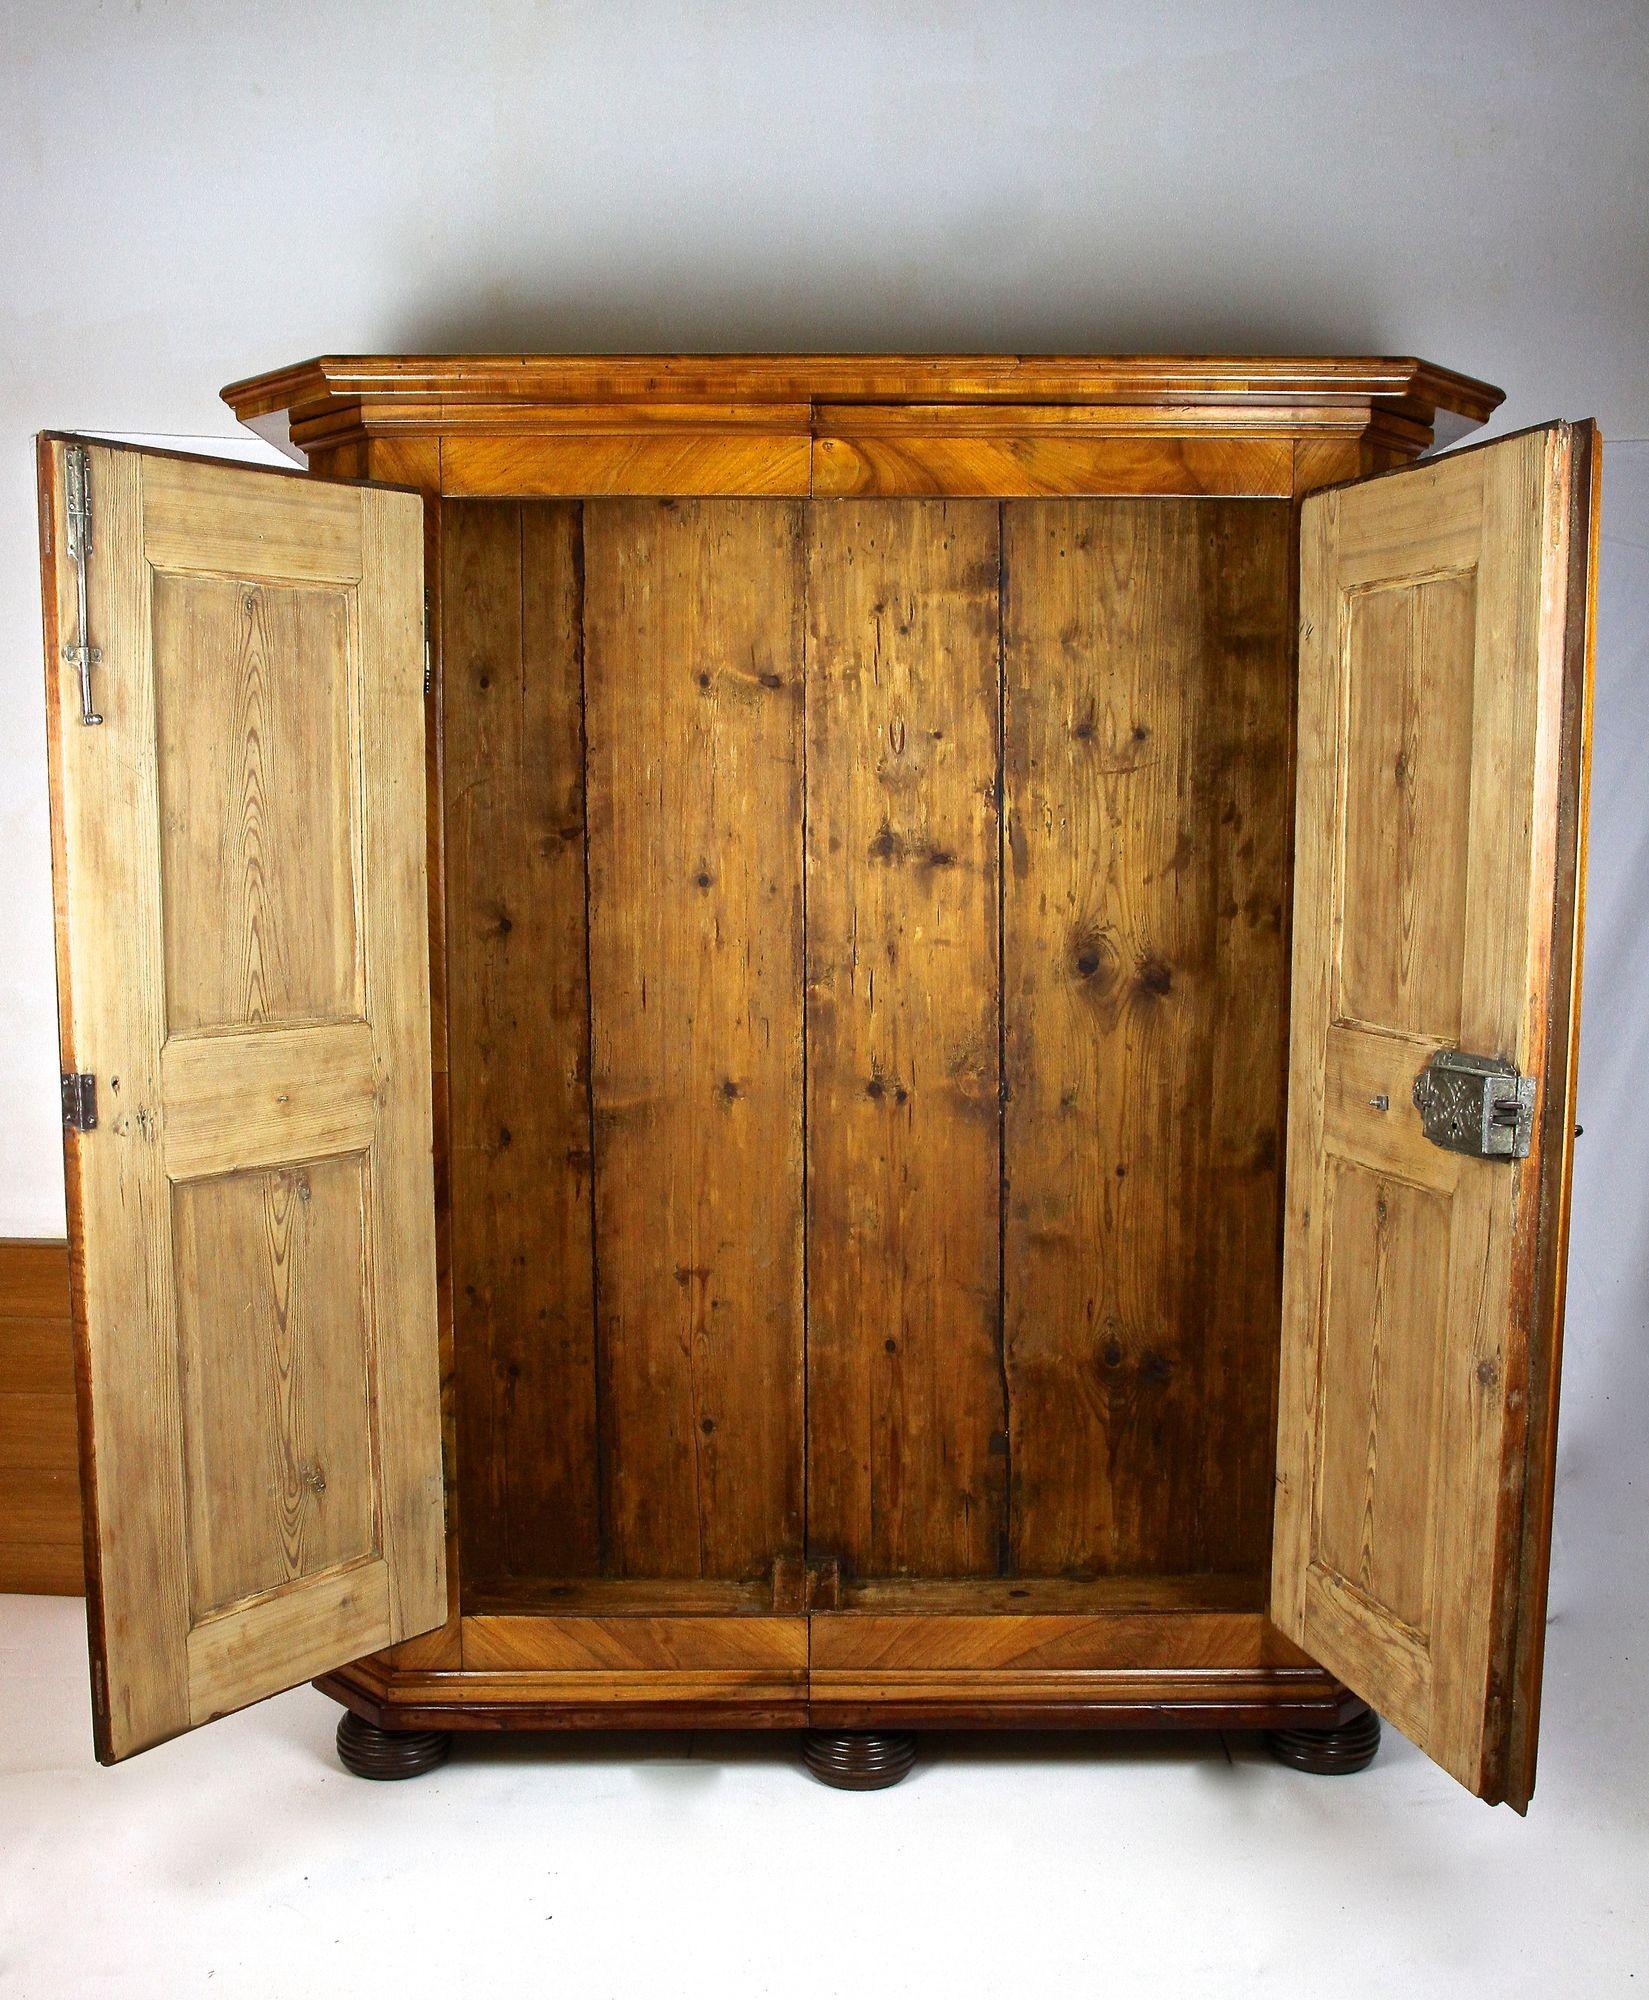 18th Century Nutwood Baroque Cabinet With Inlay Works, Austria ca. 1780 For Sale 2